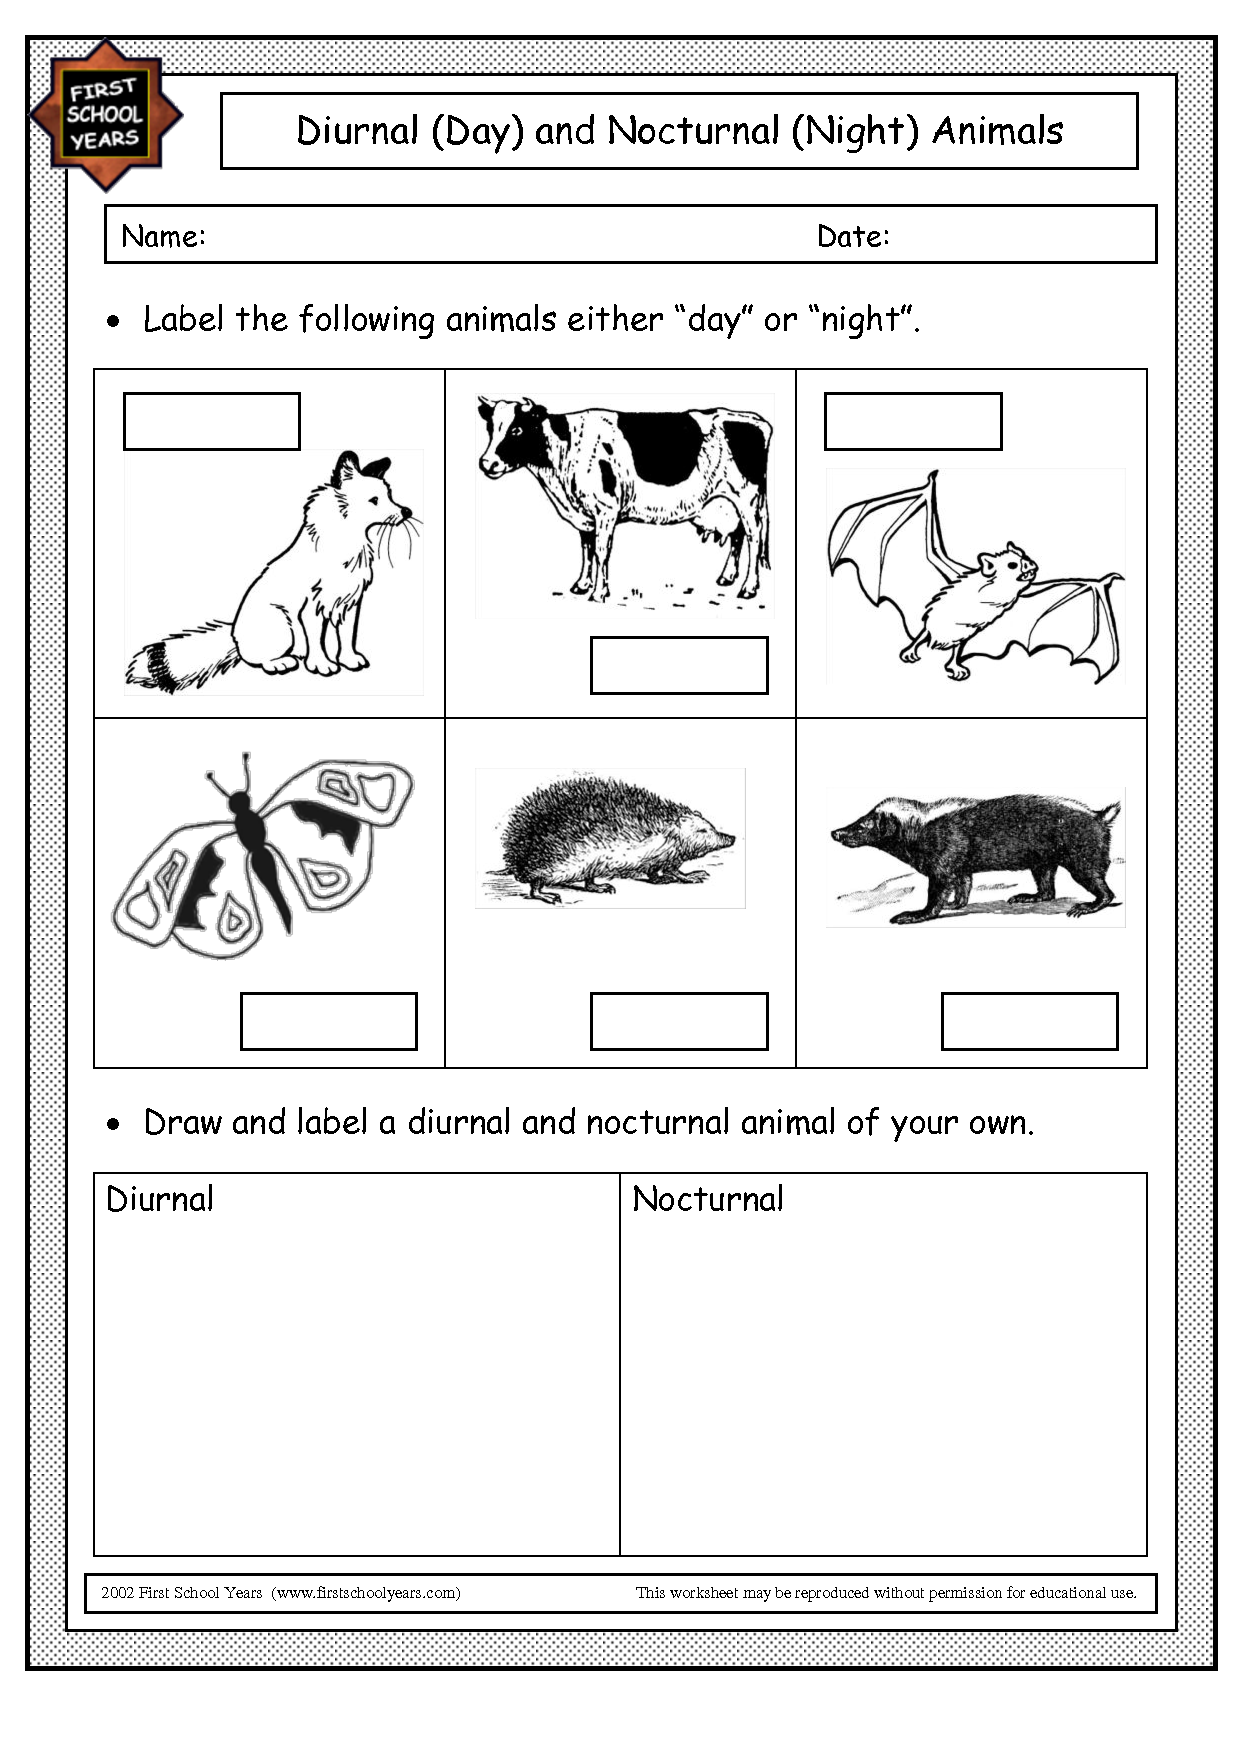 15 Best Images of Animal Family Classification Worksheets Preschool